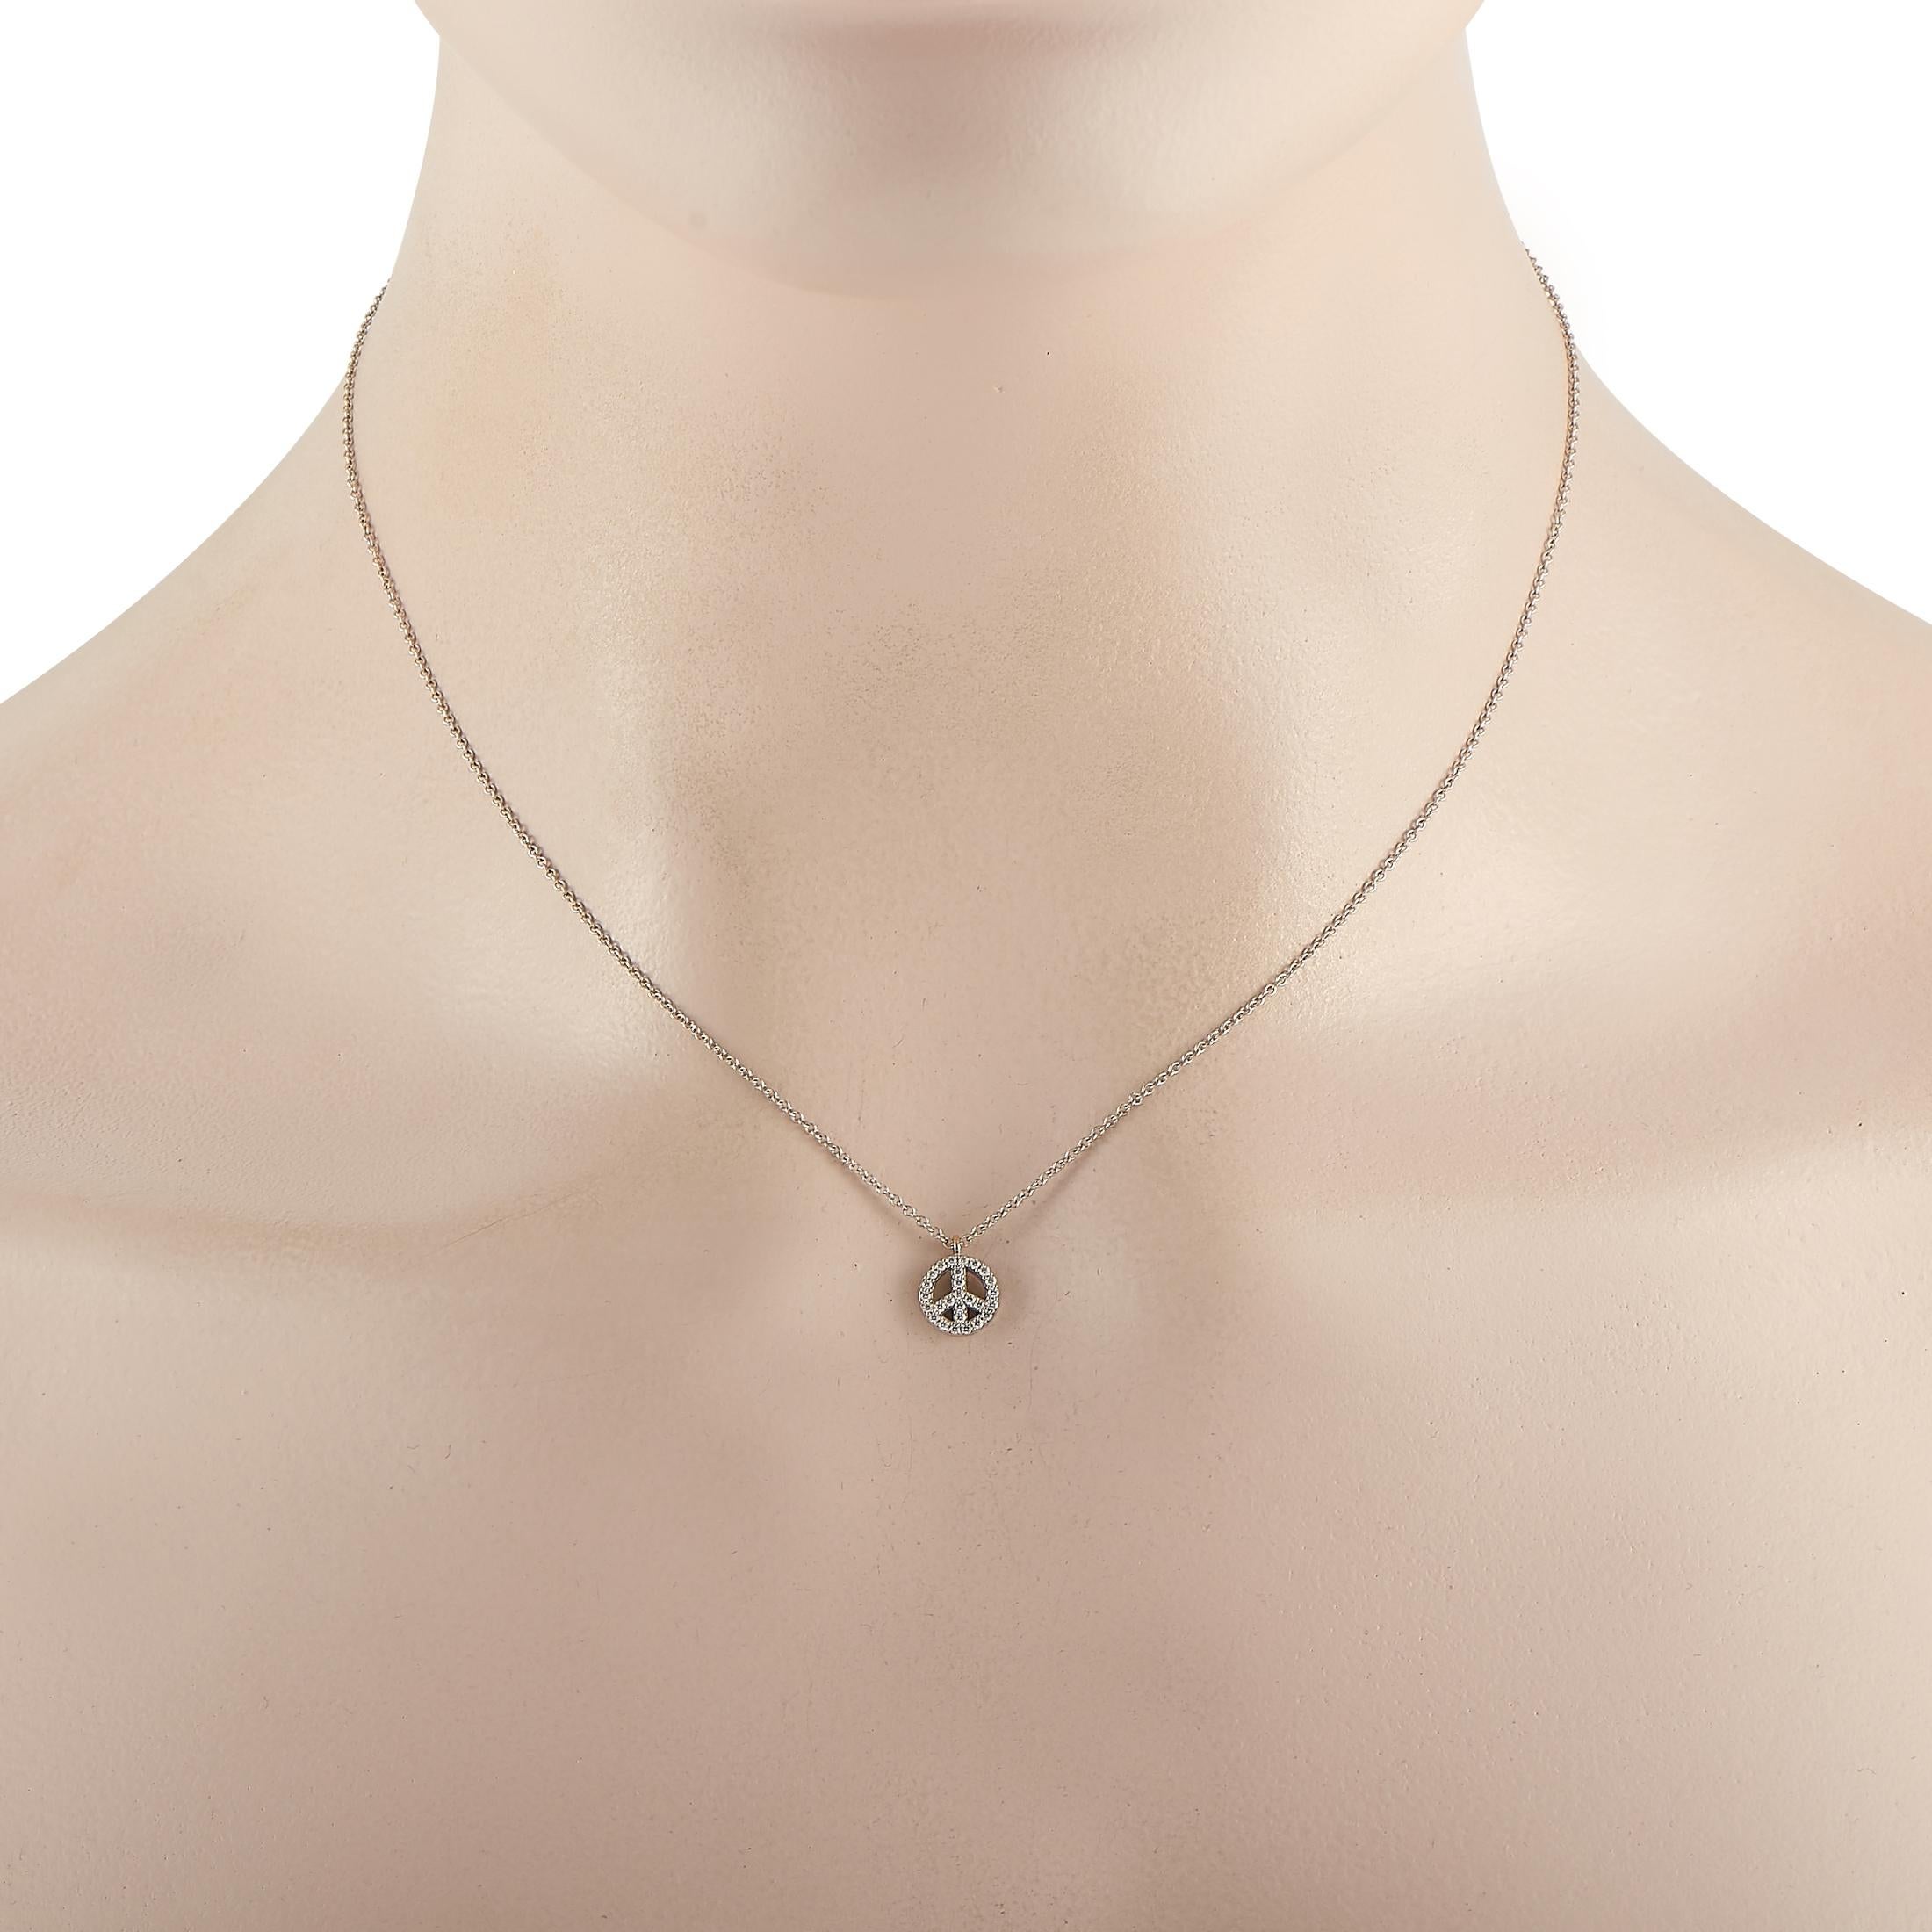 Make a meaningful statement with your choice of jewelry by adding the Tiffany & Co. 18K White Gold Diamond Peace Sign Necklace to your collection. This tastefully designed jewel features a glittering pendant fashioned in the widely recognized peace